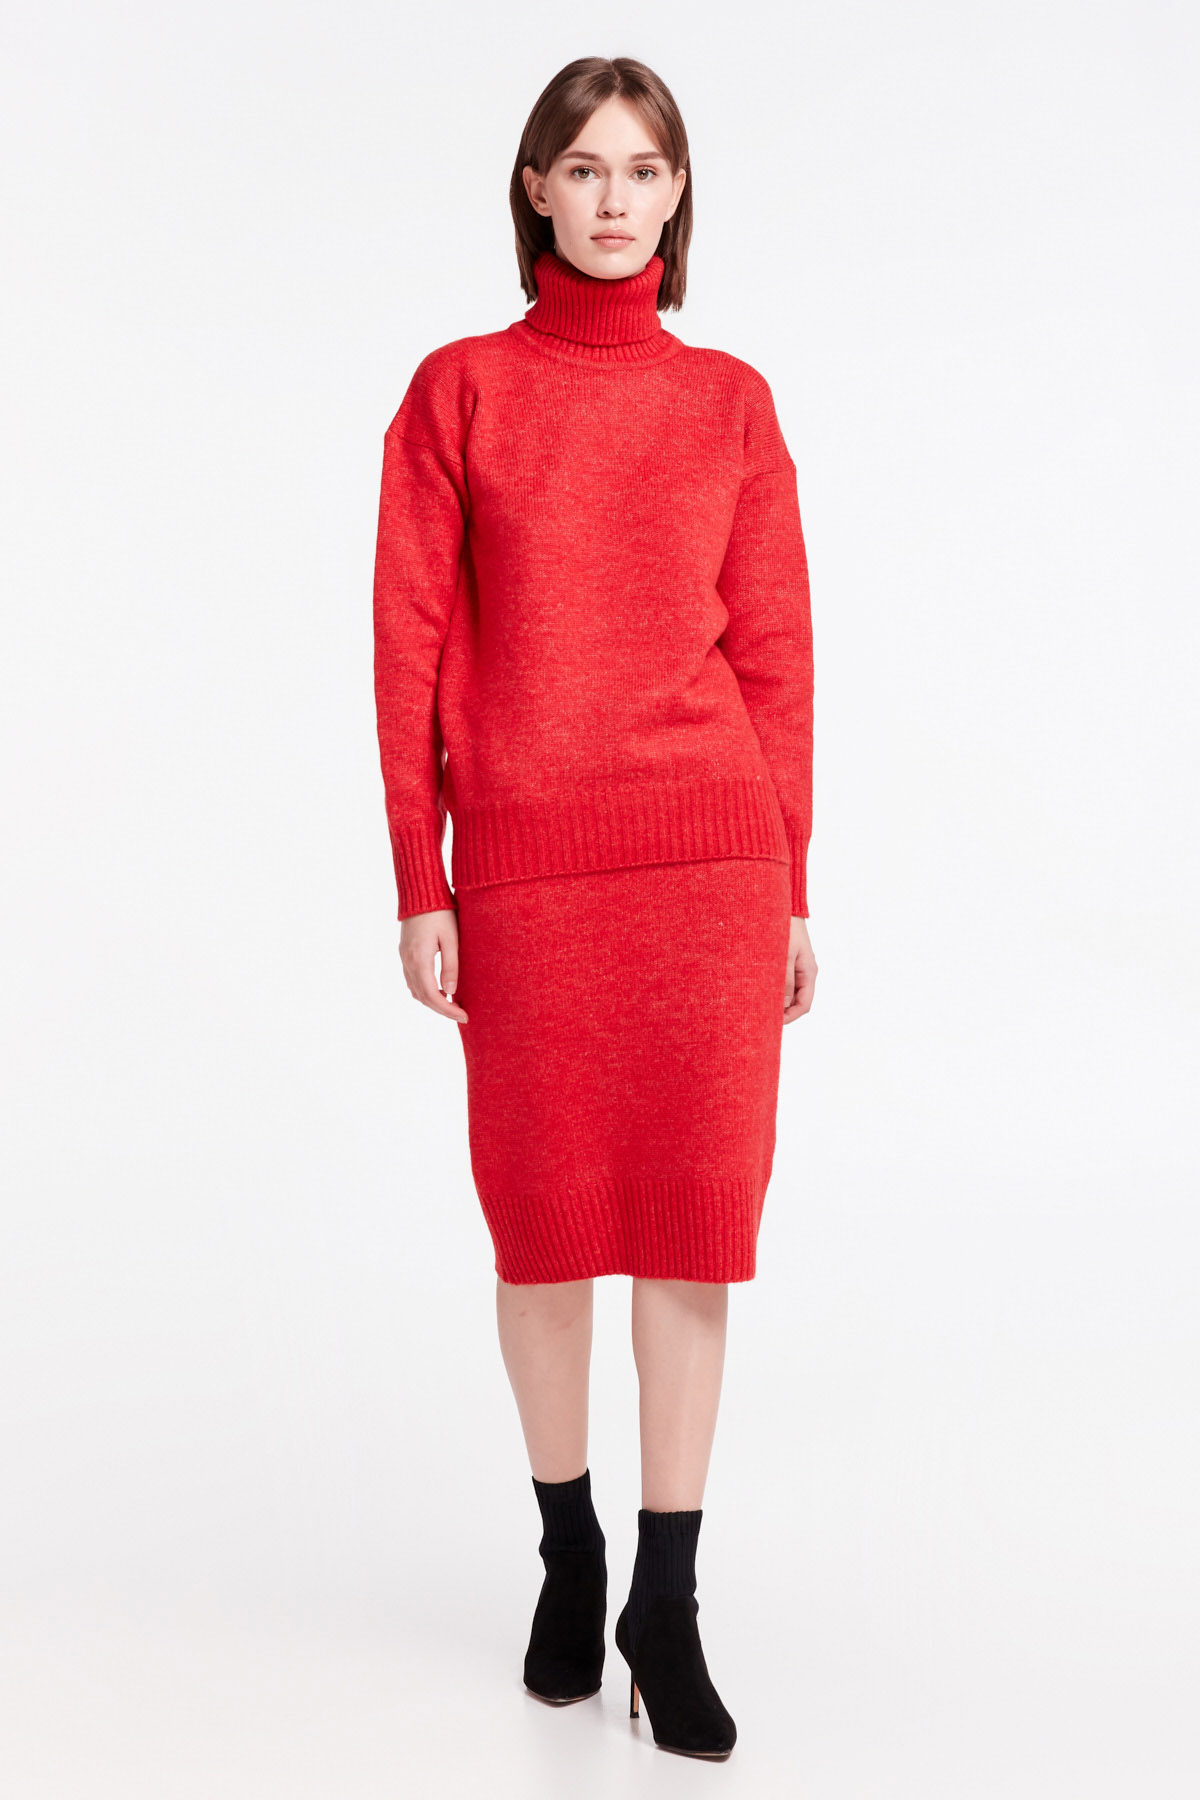 Red knit sweater, photo 2